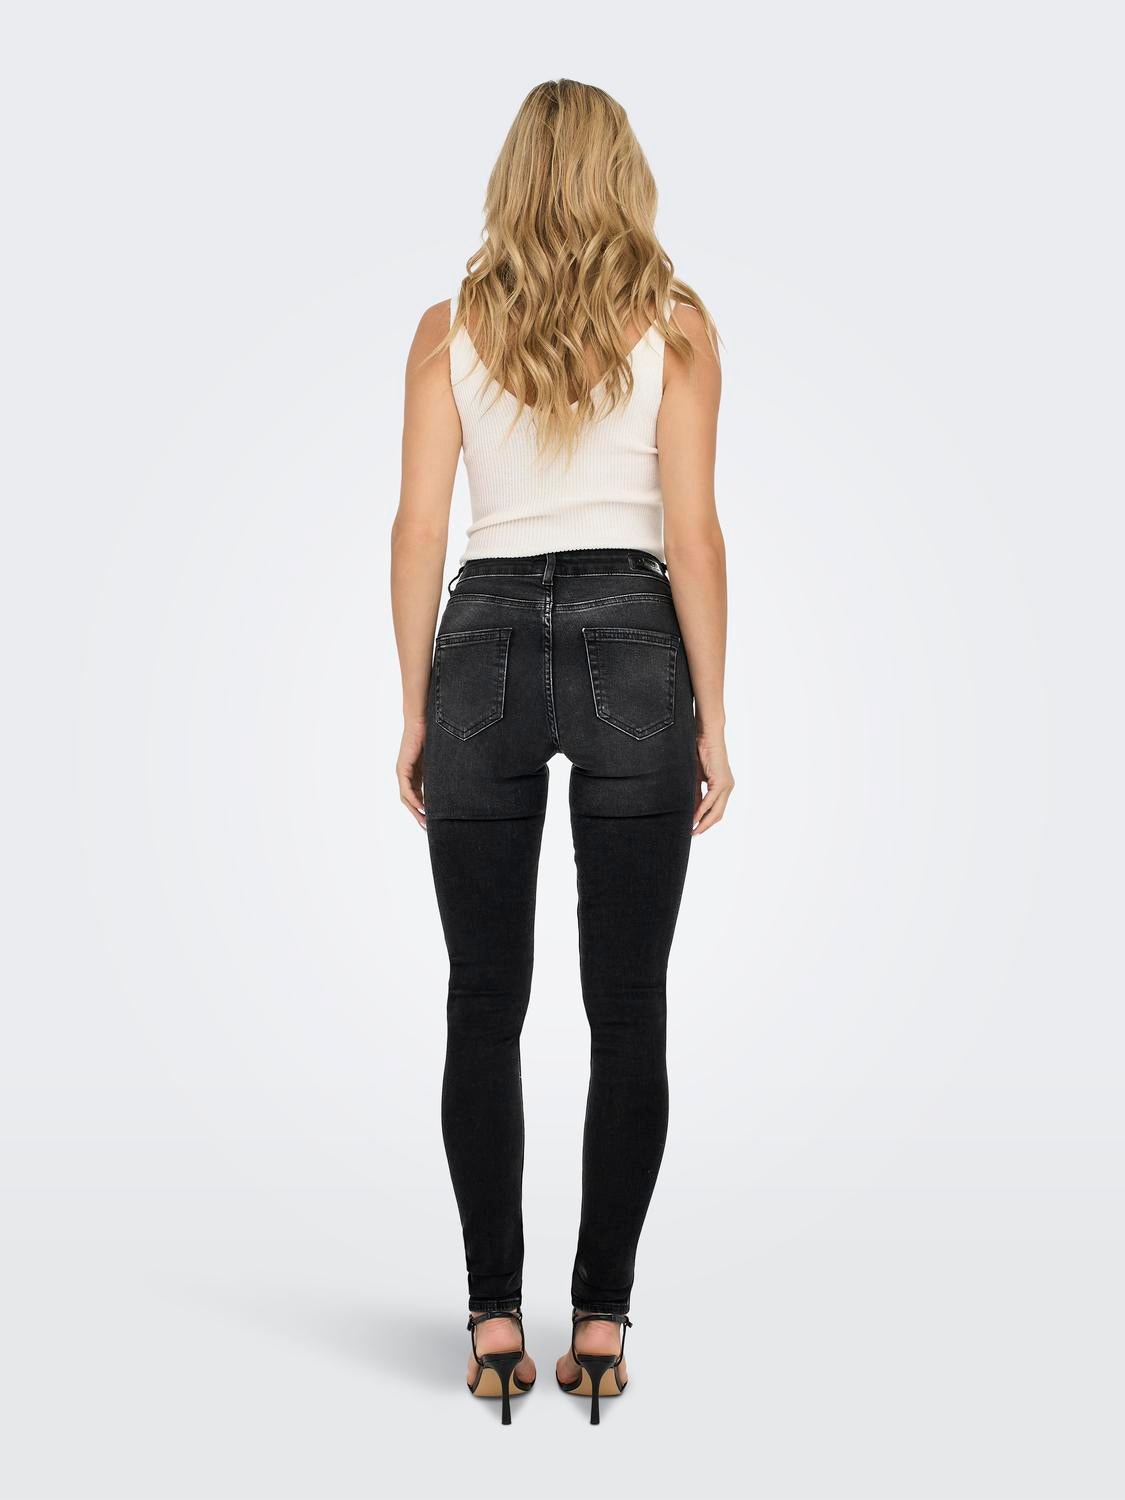 ONLY Jeans Skinny Fit Taille moyenne -Black Denim - 15225846